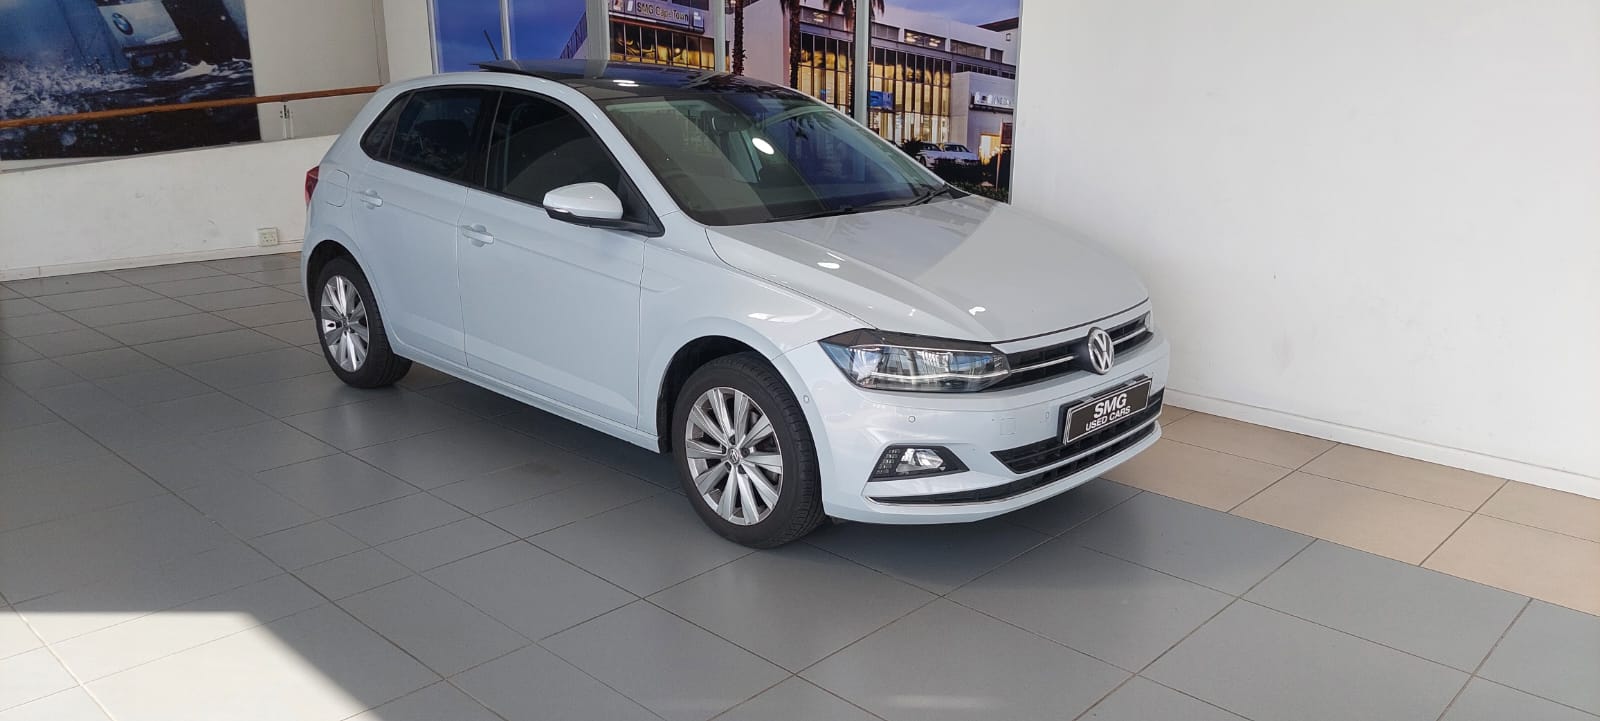 2019 Volkswagen Polo 1.0 TSi Highline  for sale - SMG12|USED|115433